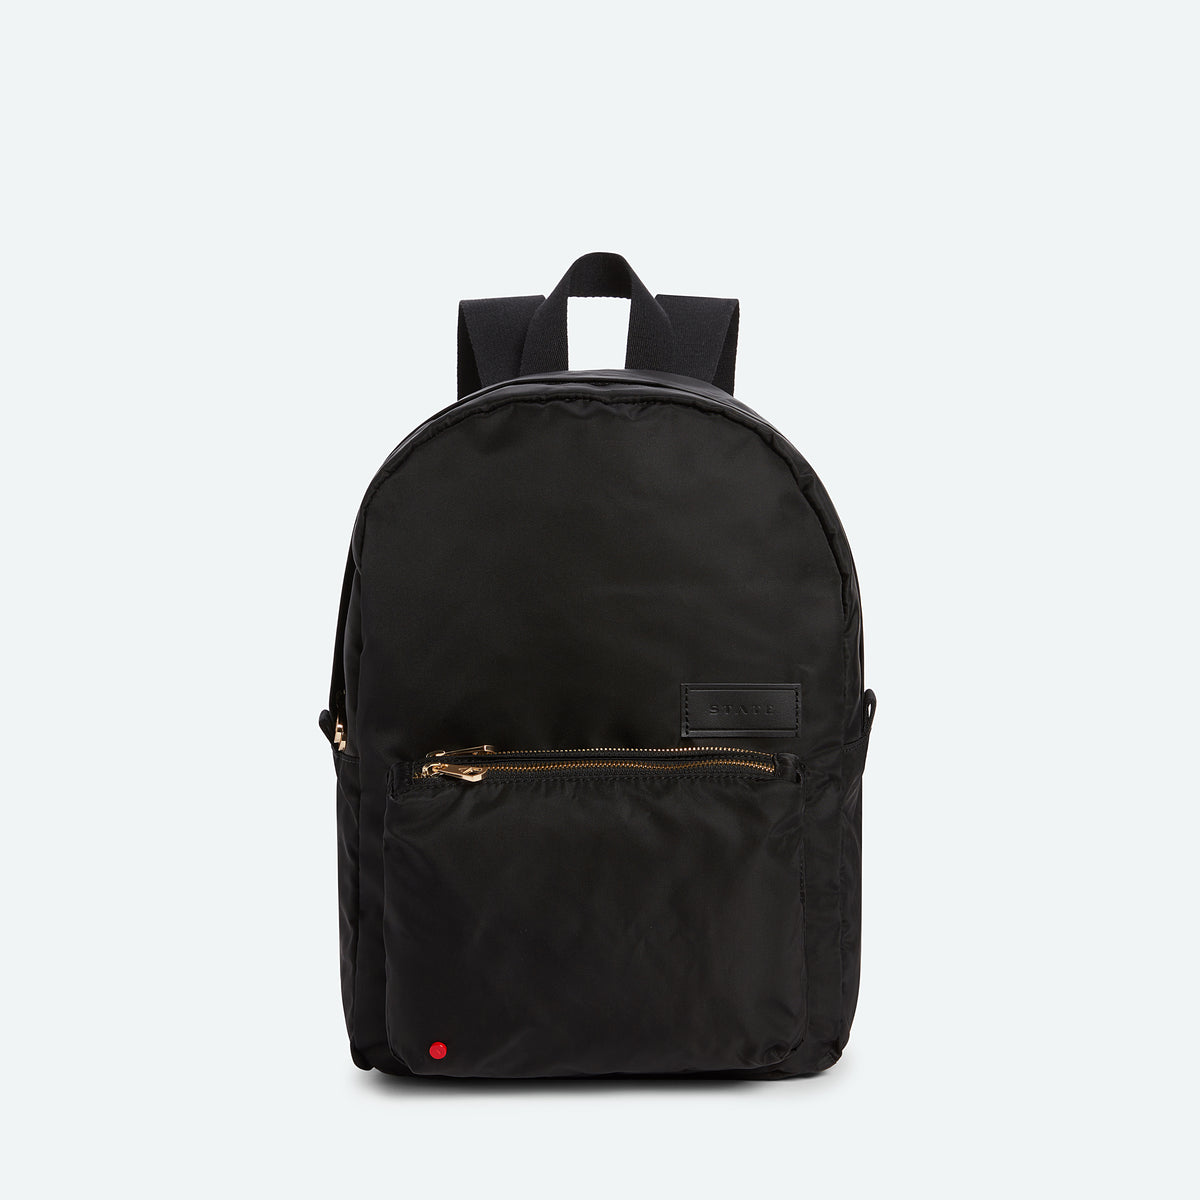 STATE Bags - Mini Lorimer Backpack in Leather